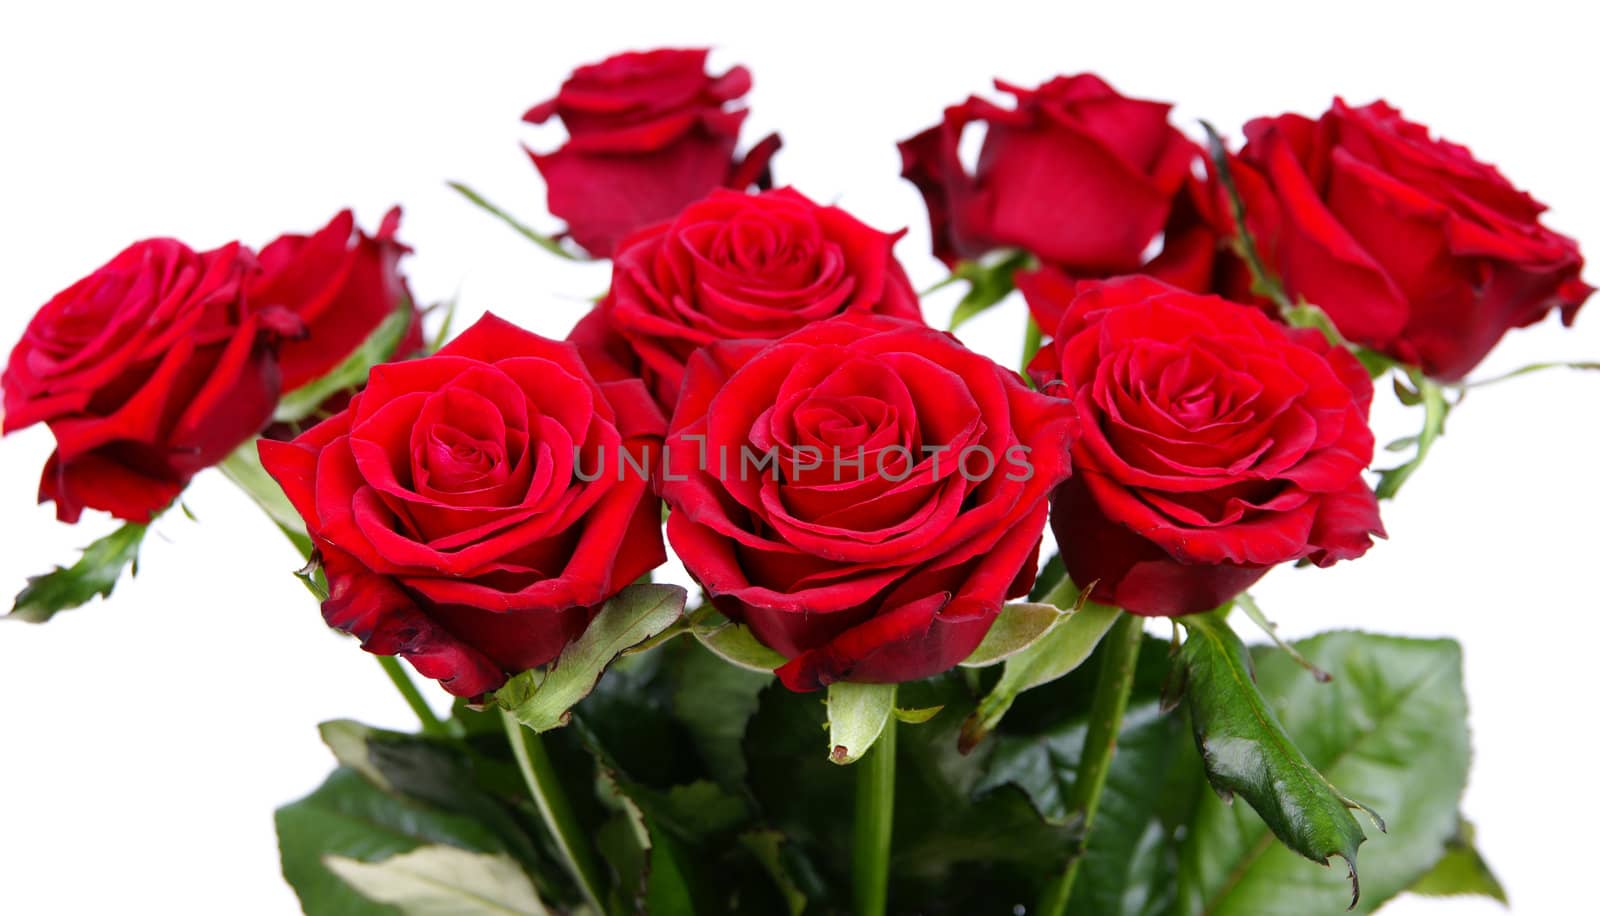 Bouquet of red fresh roses on white background